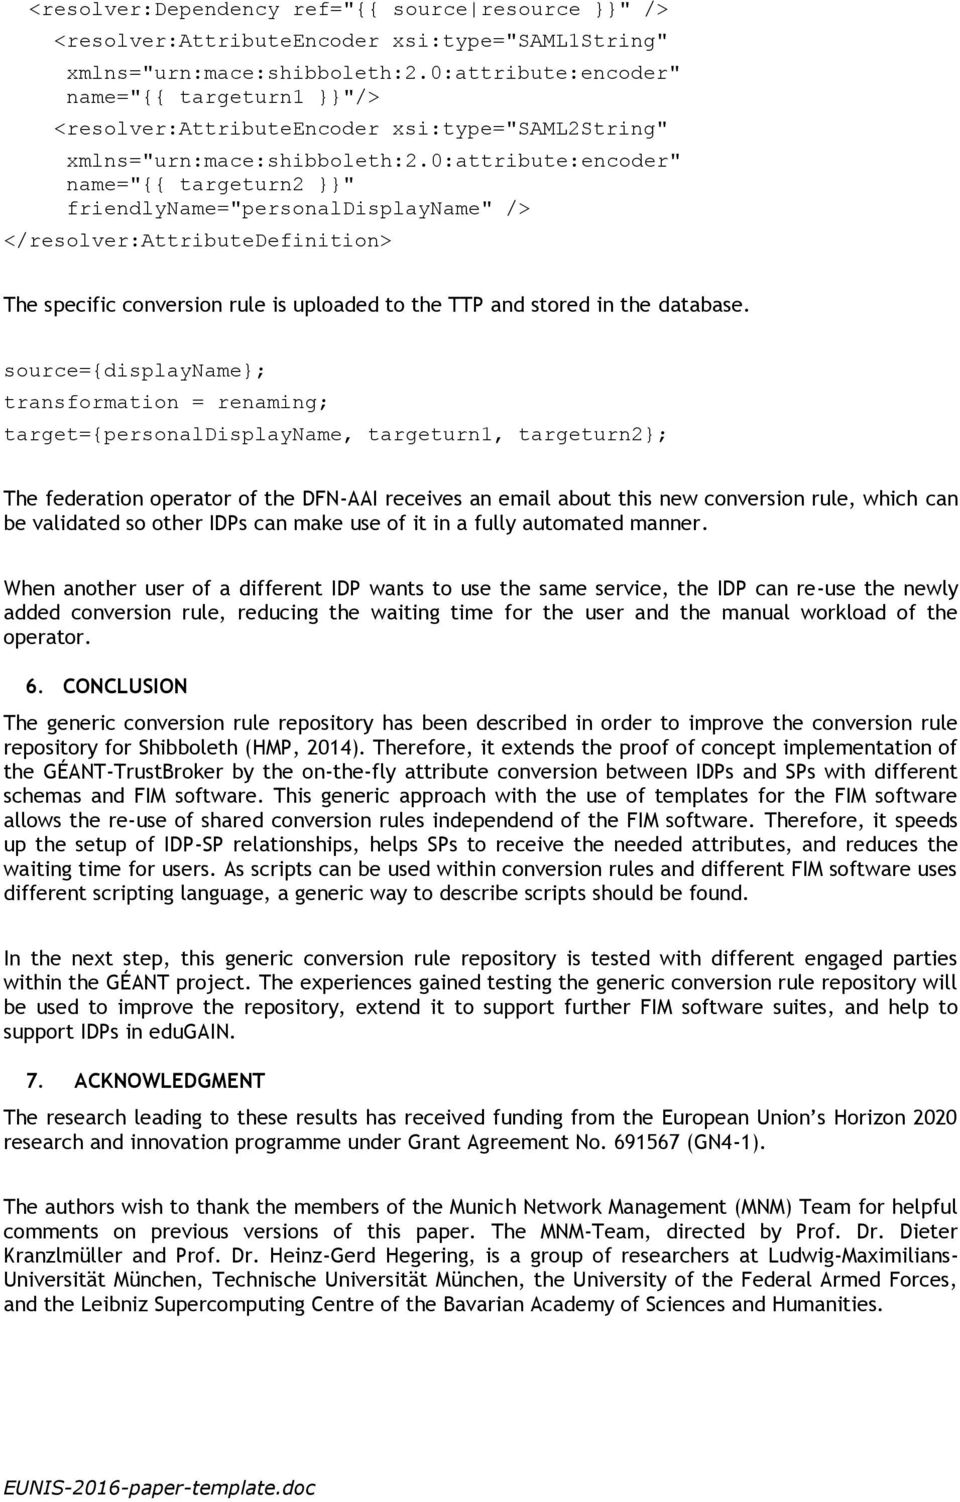 source={displayname}; transformation = renaming; target={personaldisplayname, targeturn1, targeturn2}; The federation operator of the DFN-AAI receives an email about this new conversion rule, which